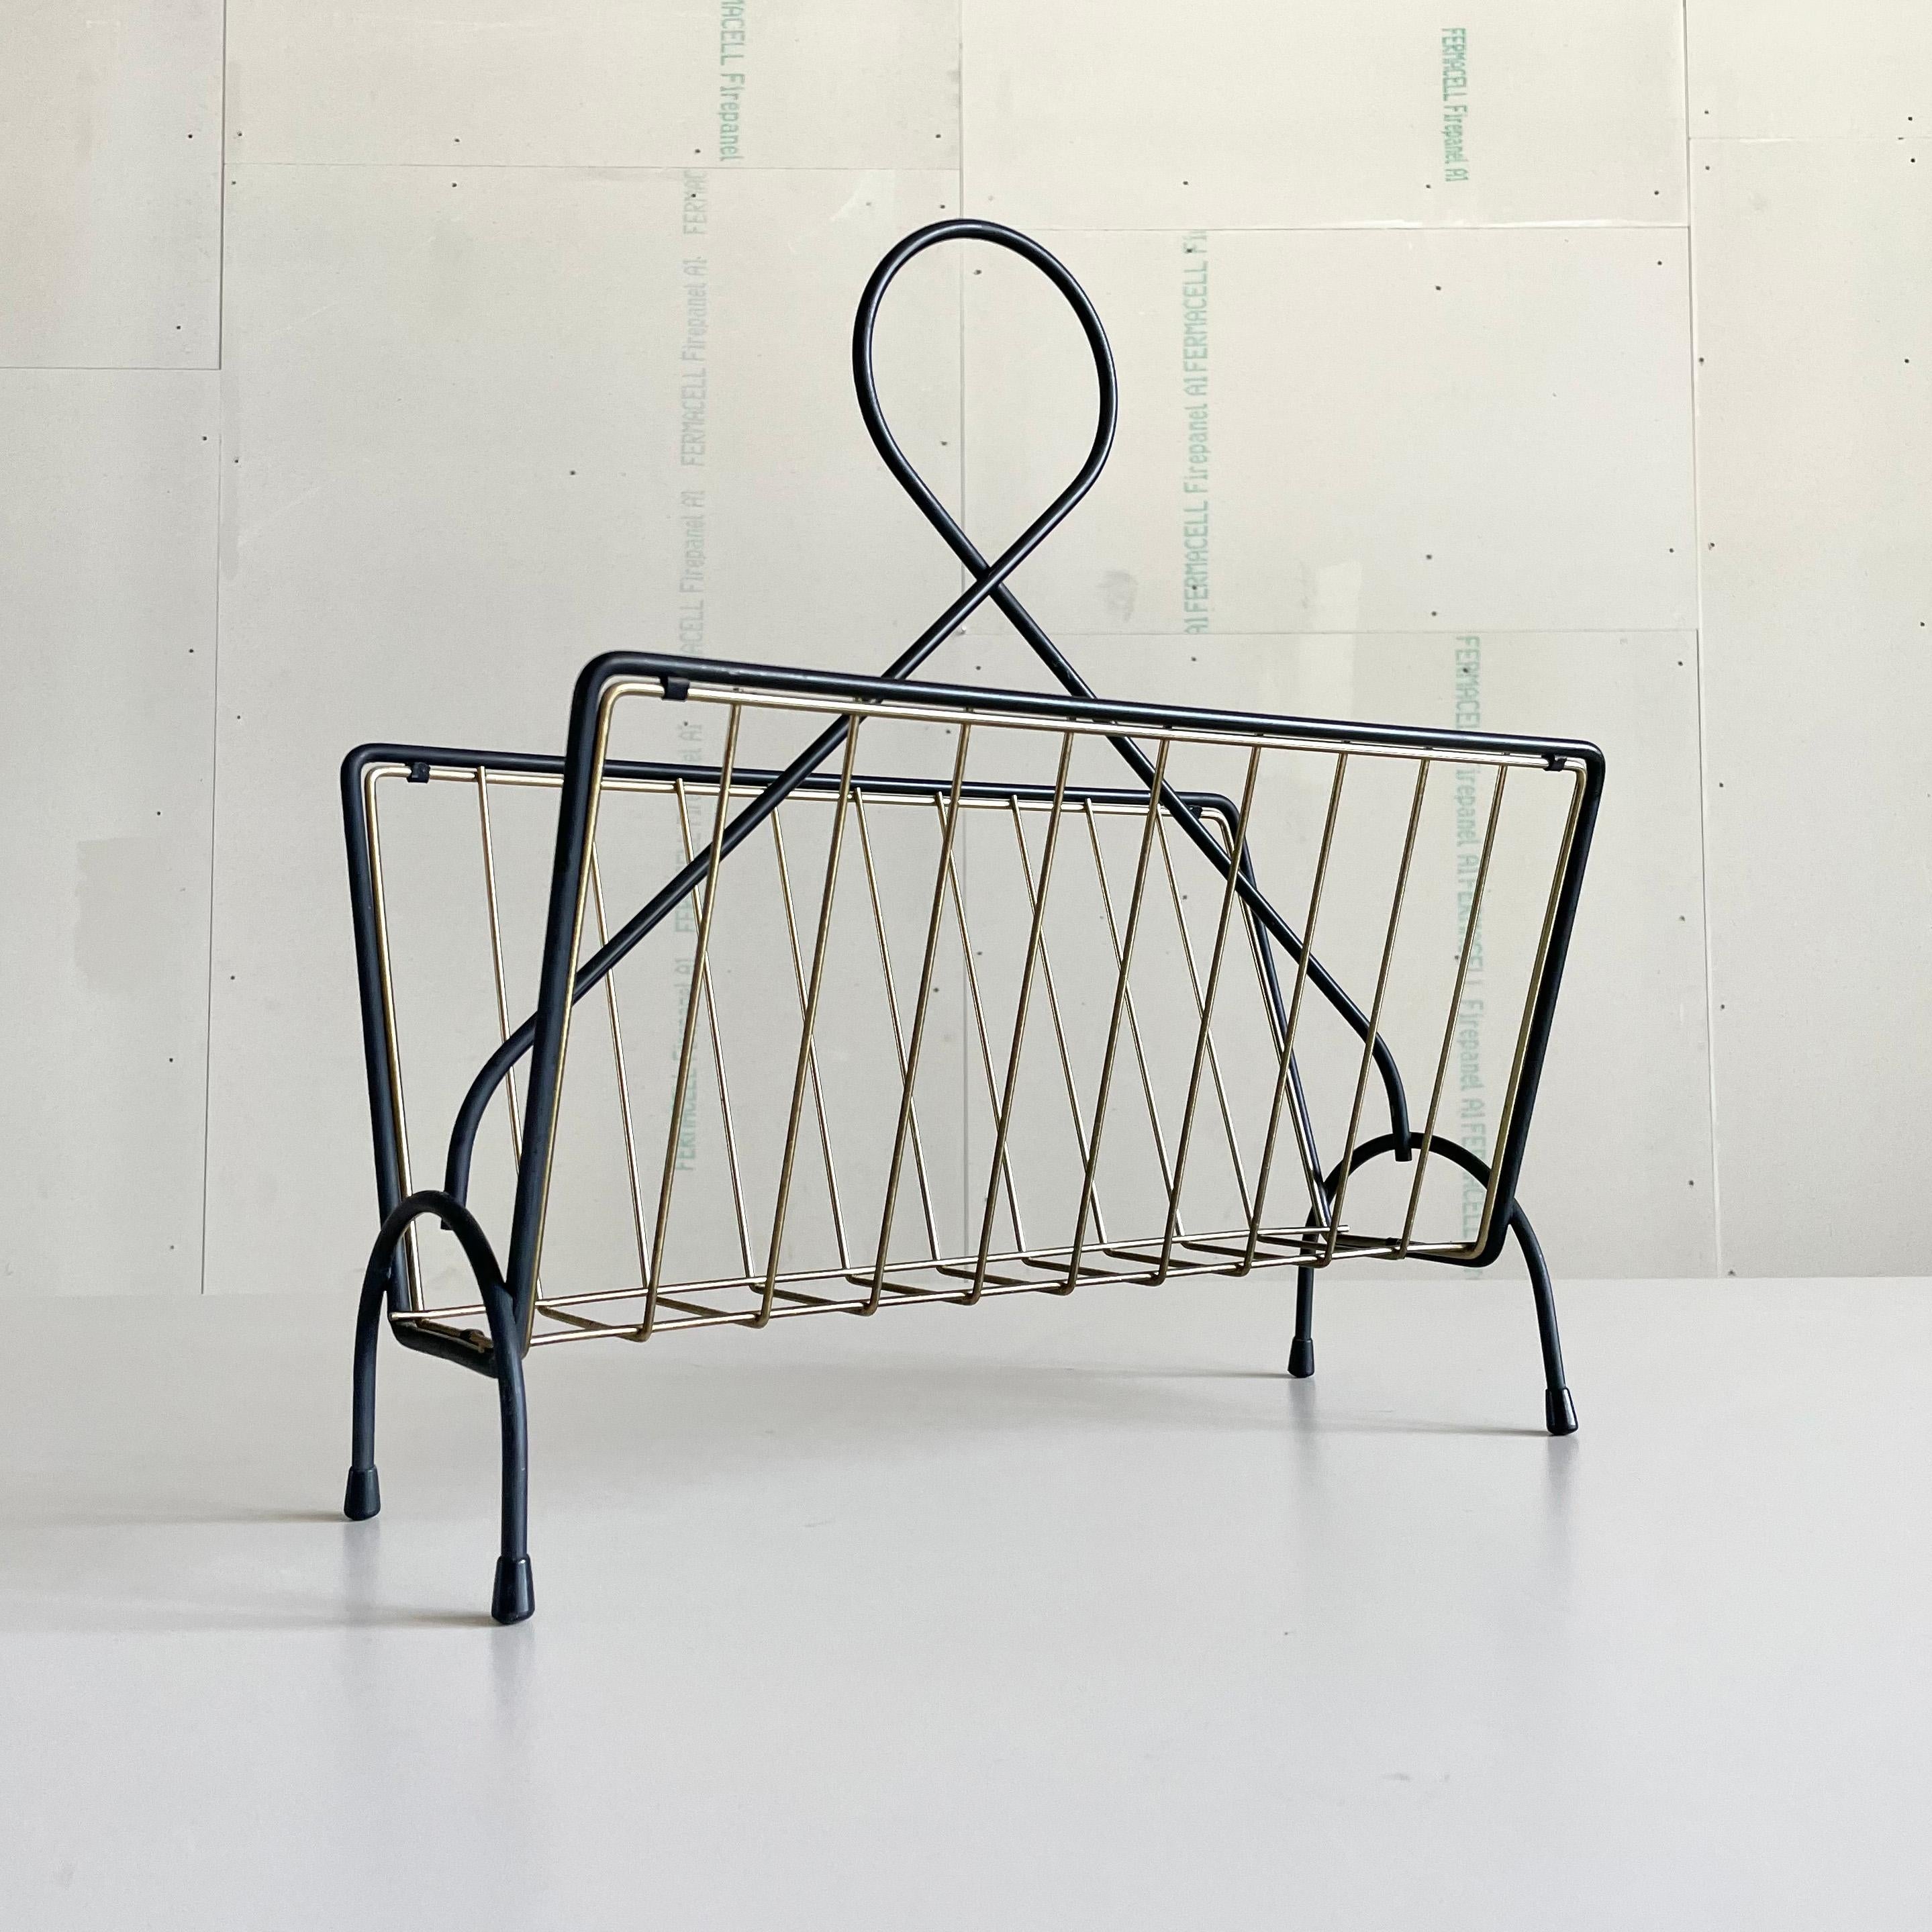 Stylish Mid Century Swiss made Magazine / Newspaper Rack with Brass details and rubber feet. Believed to be produced for Möbel Pfister, Switzerland in the late 1950’s, early 1960's 
Measurements: Height: 47.5 cm  Width: 42 cm  Depth: 18.5 cm